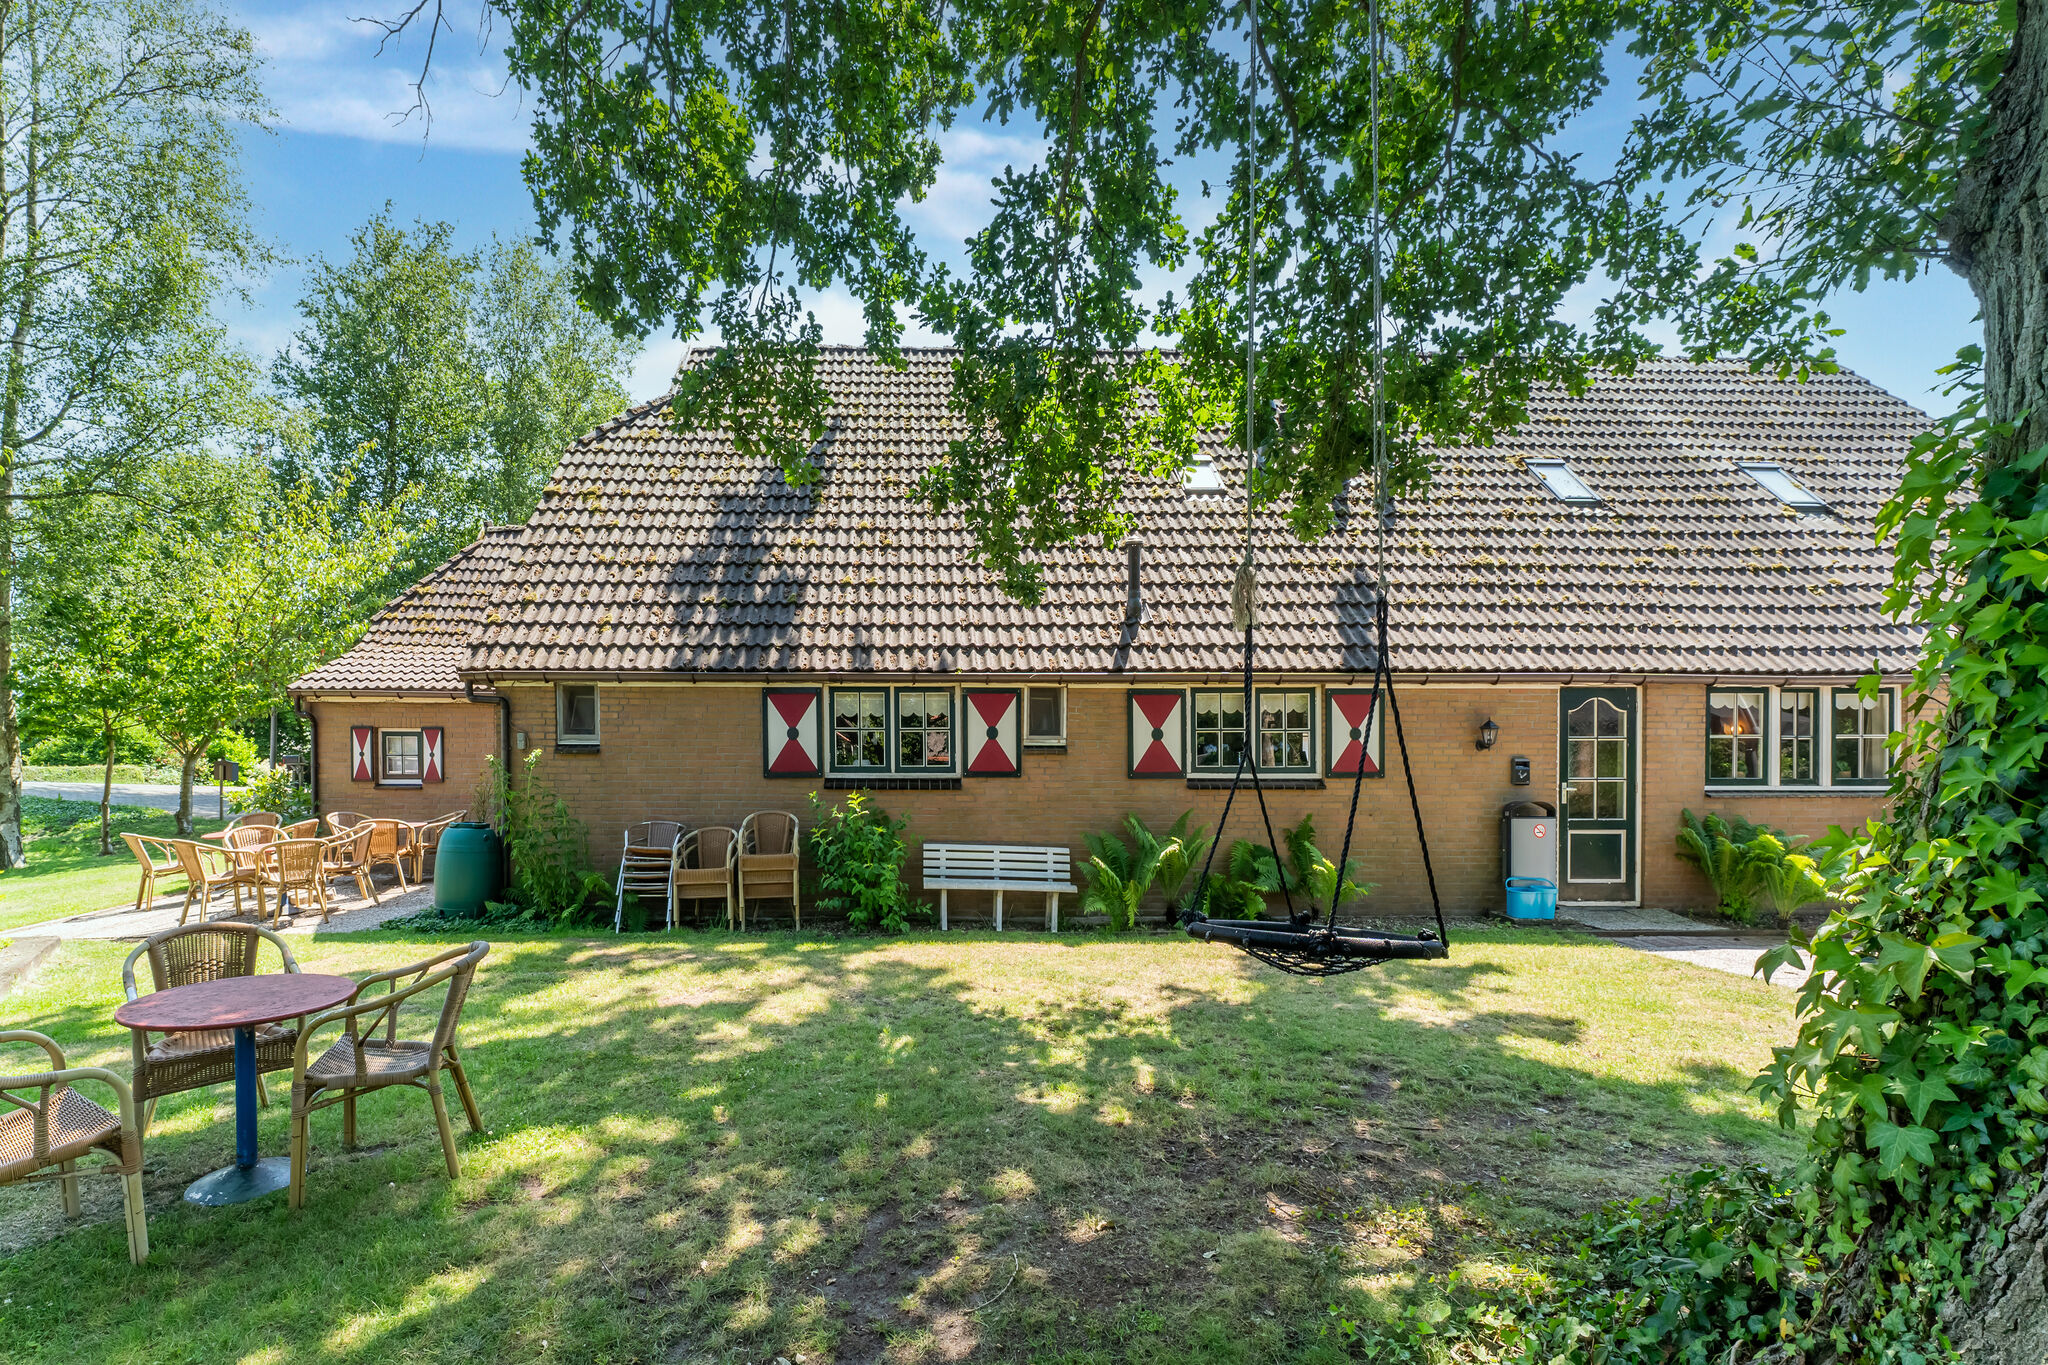 Holiday home in the heart of Giethoorn